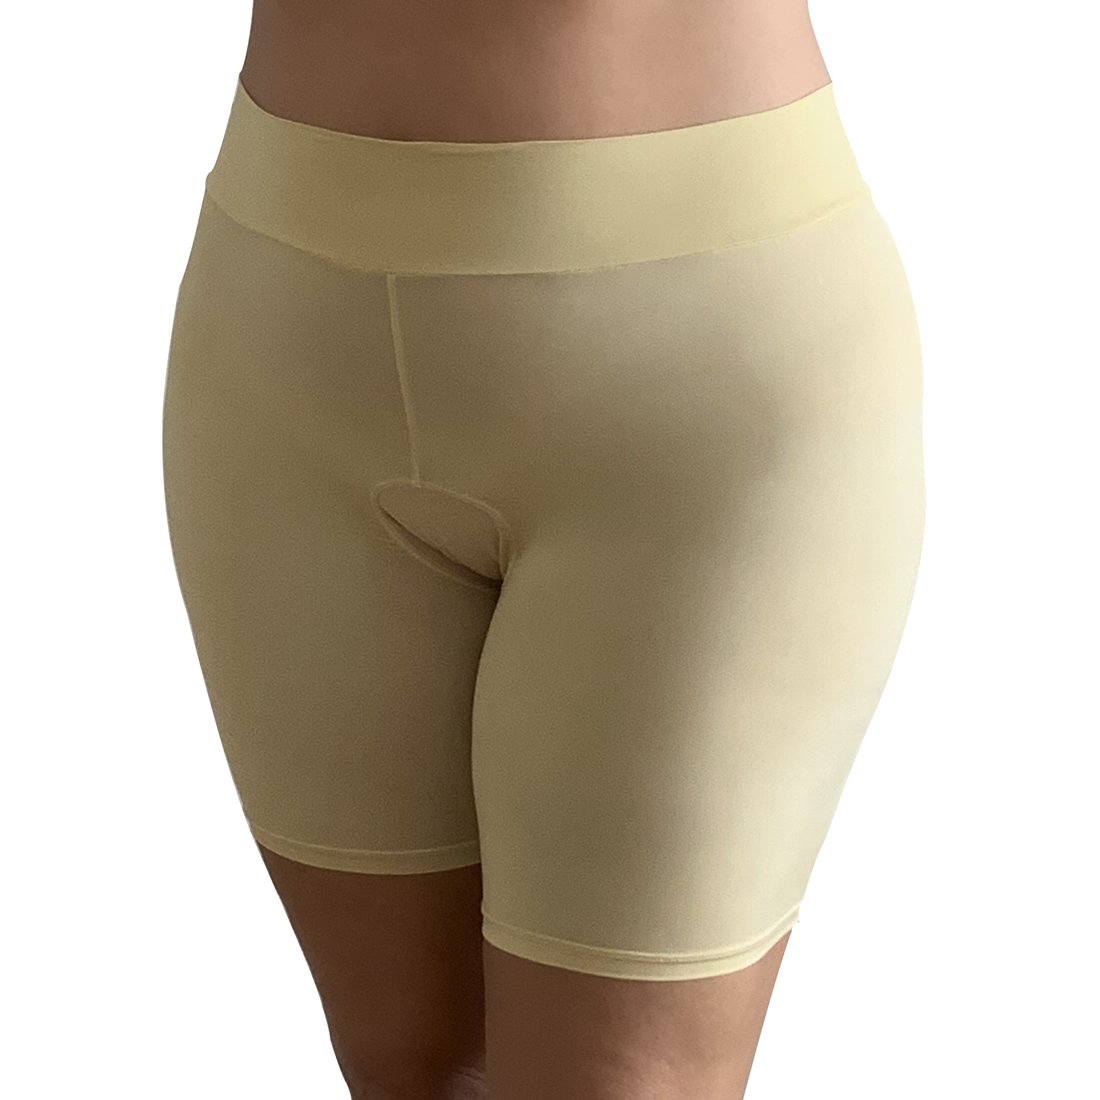 Essential Beige color Skanties in XS to XXL, offering seamless integration with any outfit for daily comfort.